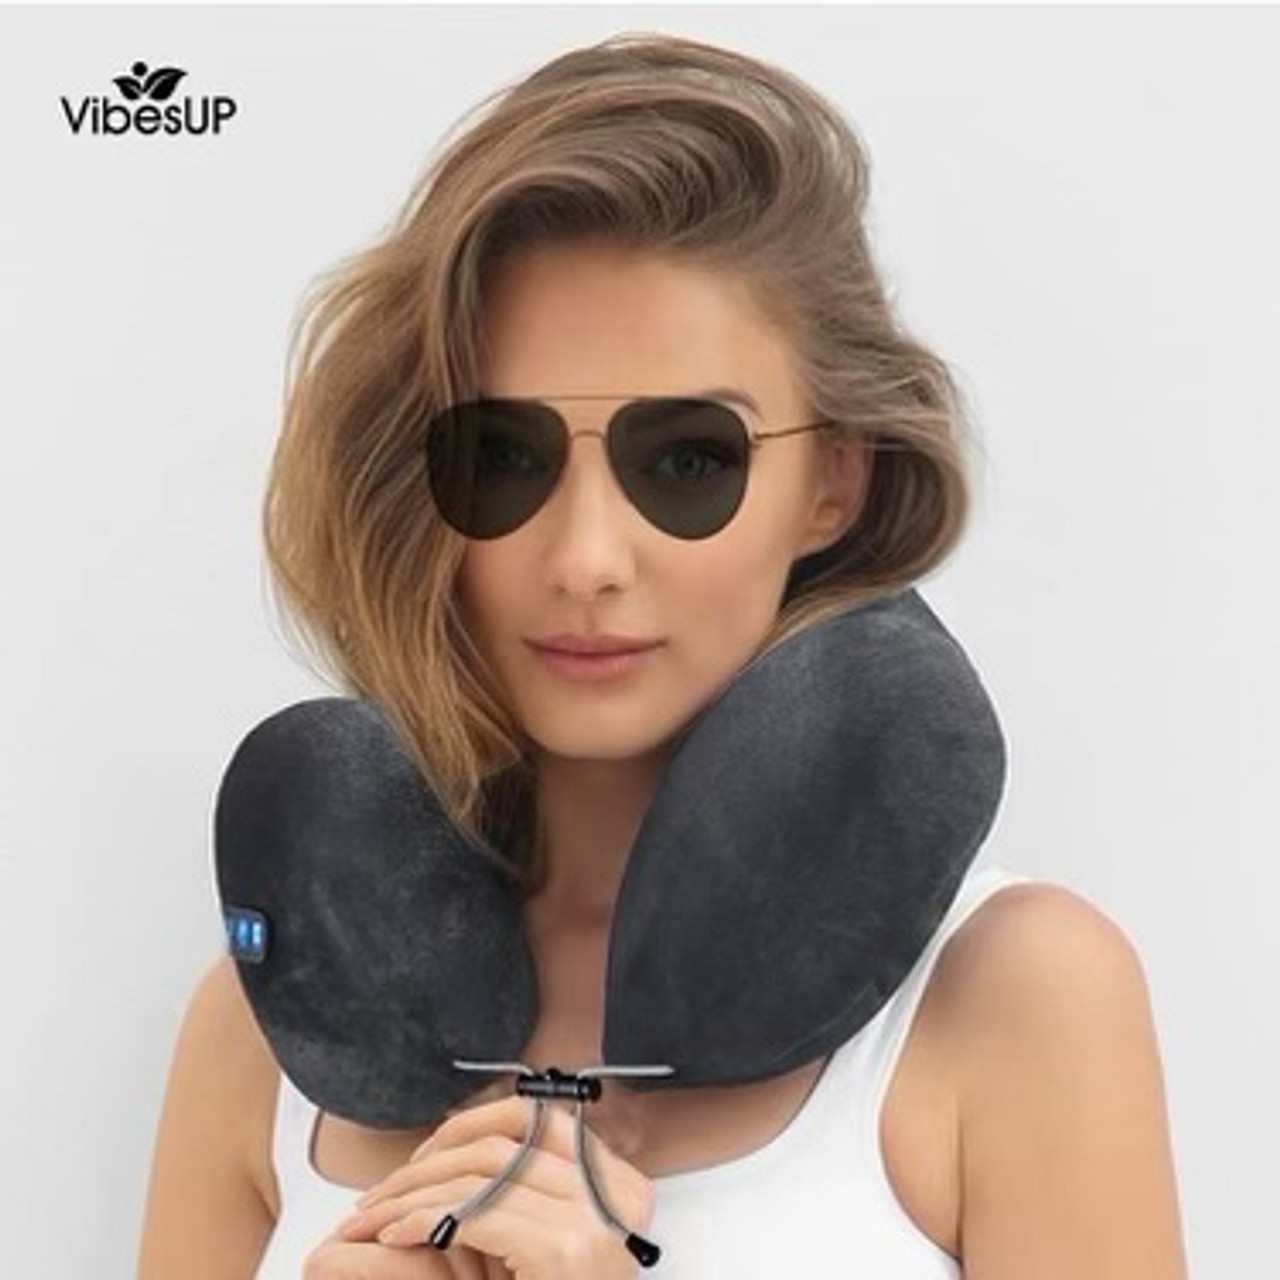 EXTREME NECK THERAPY- KNEADING NECK MASSAGER with VibesUP Crystal Vibes